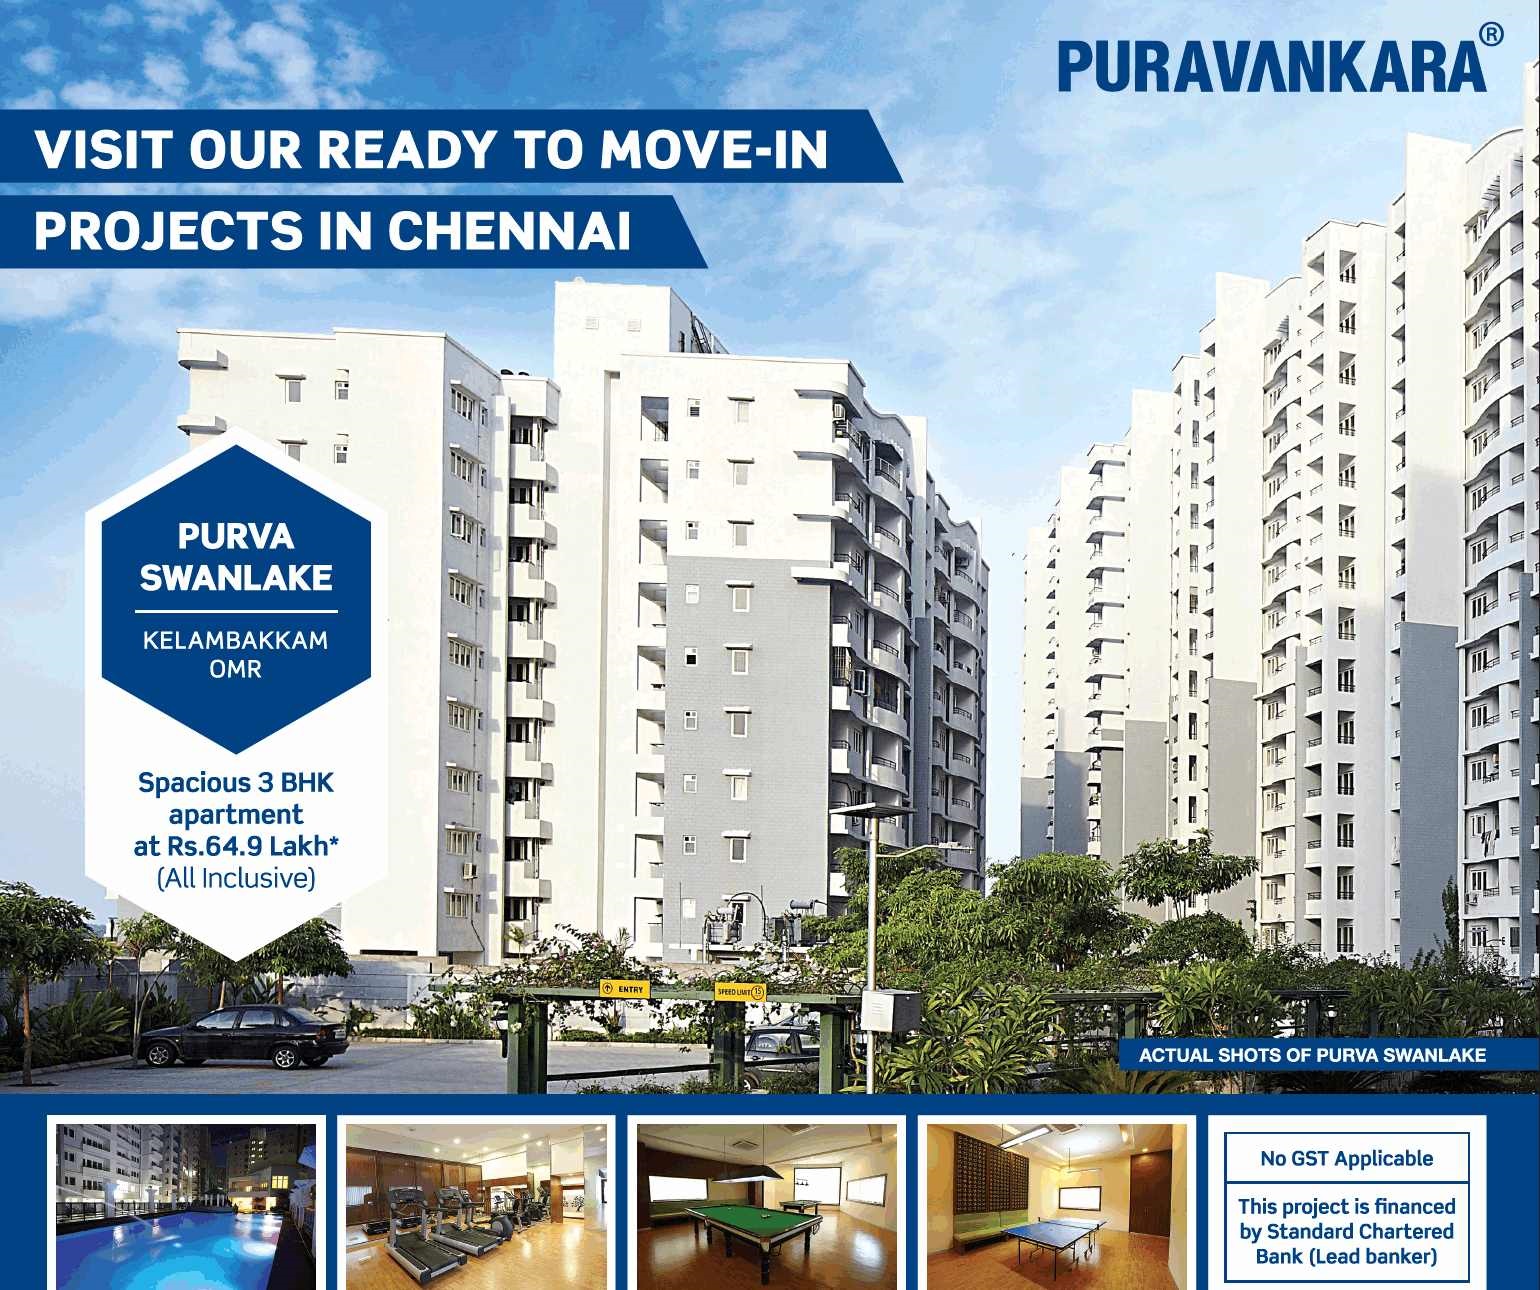 Book ready to move in spacious 3 bhk apartments at Purva Swanlake in Chennai